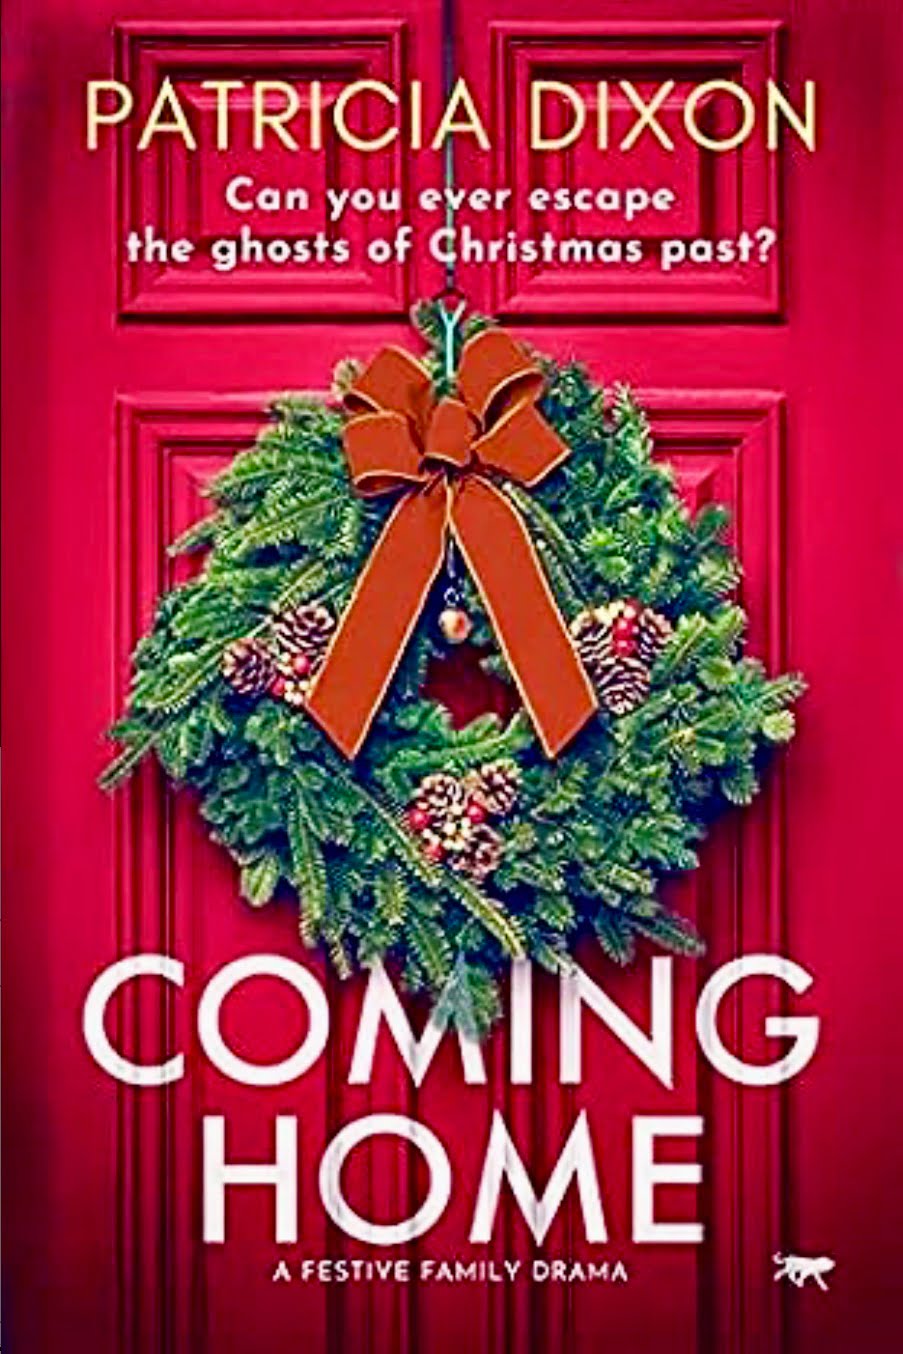 COMING HOME BY PATRICIA DIXON – BOOK REVIEW